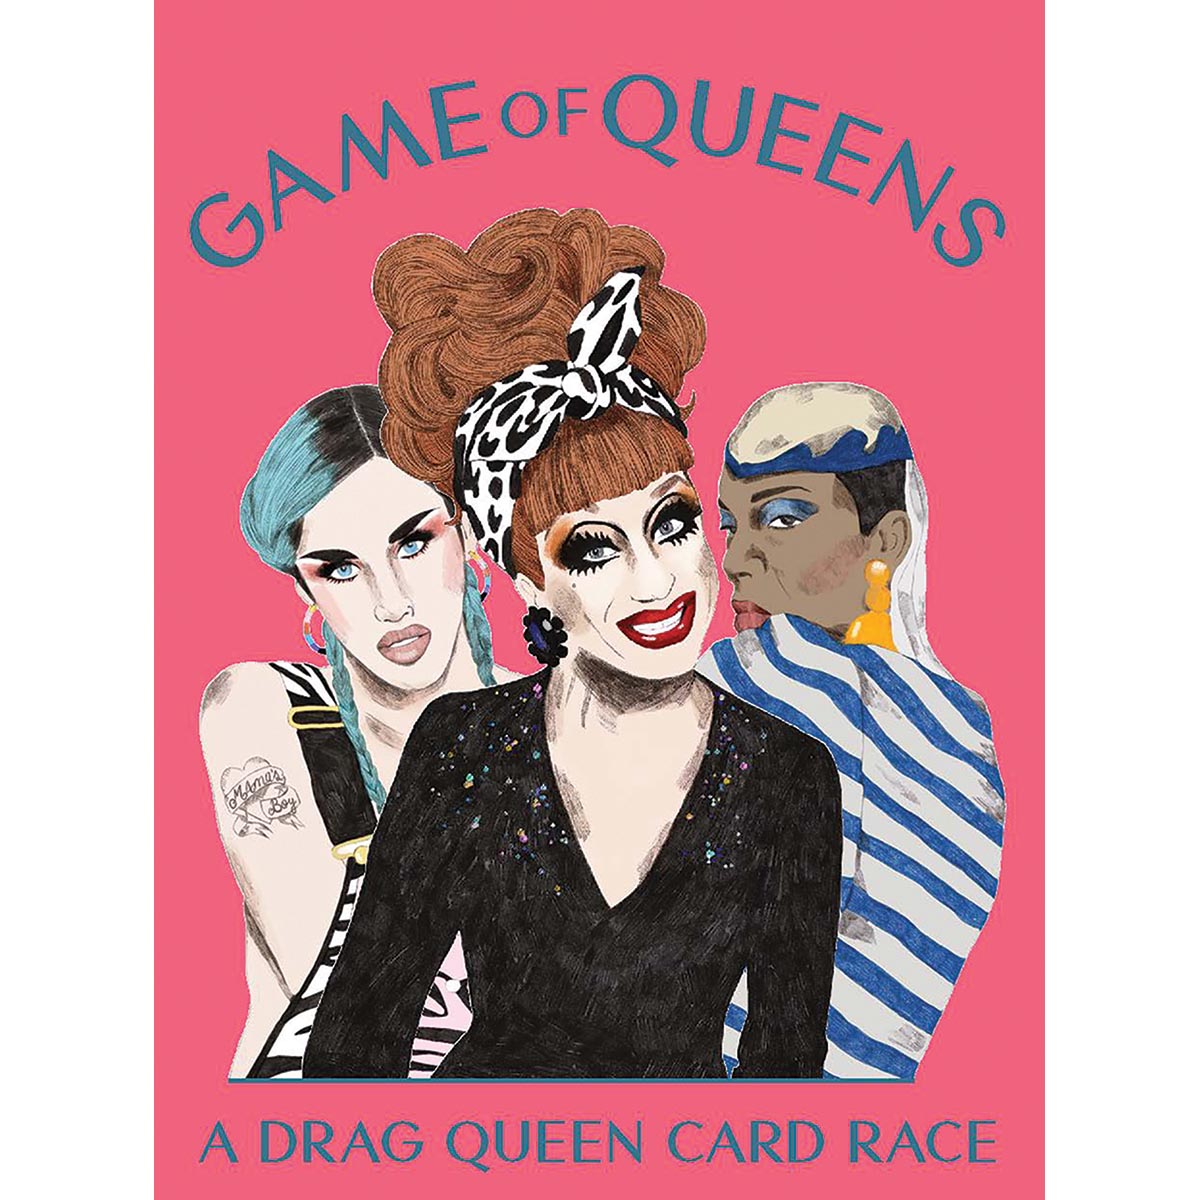 Game of Queens - Hachette Book Group